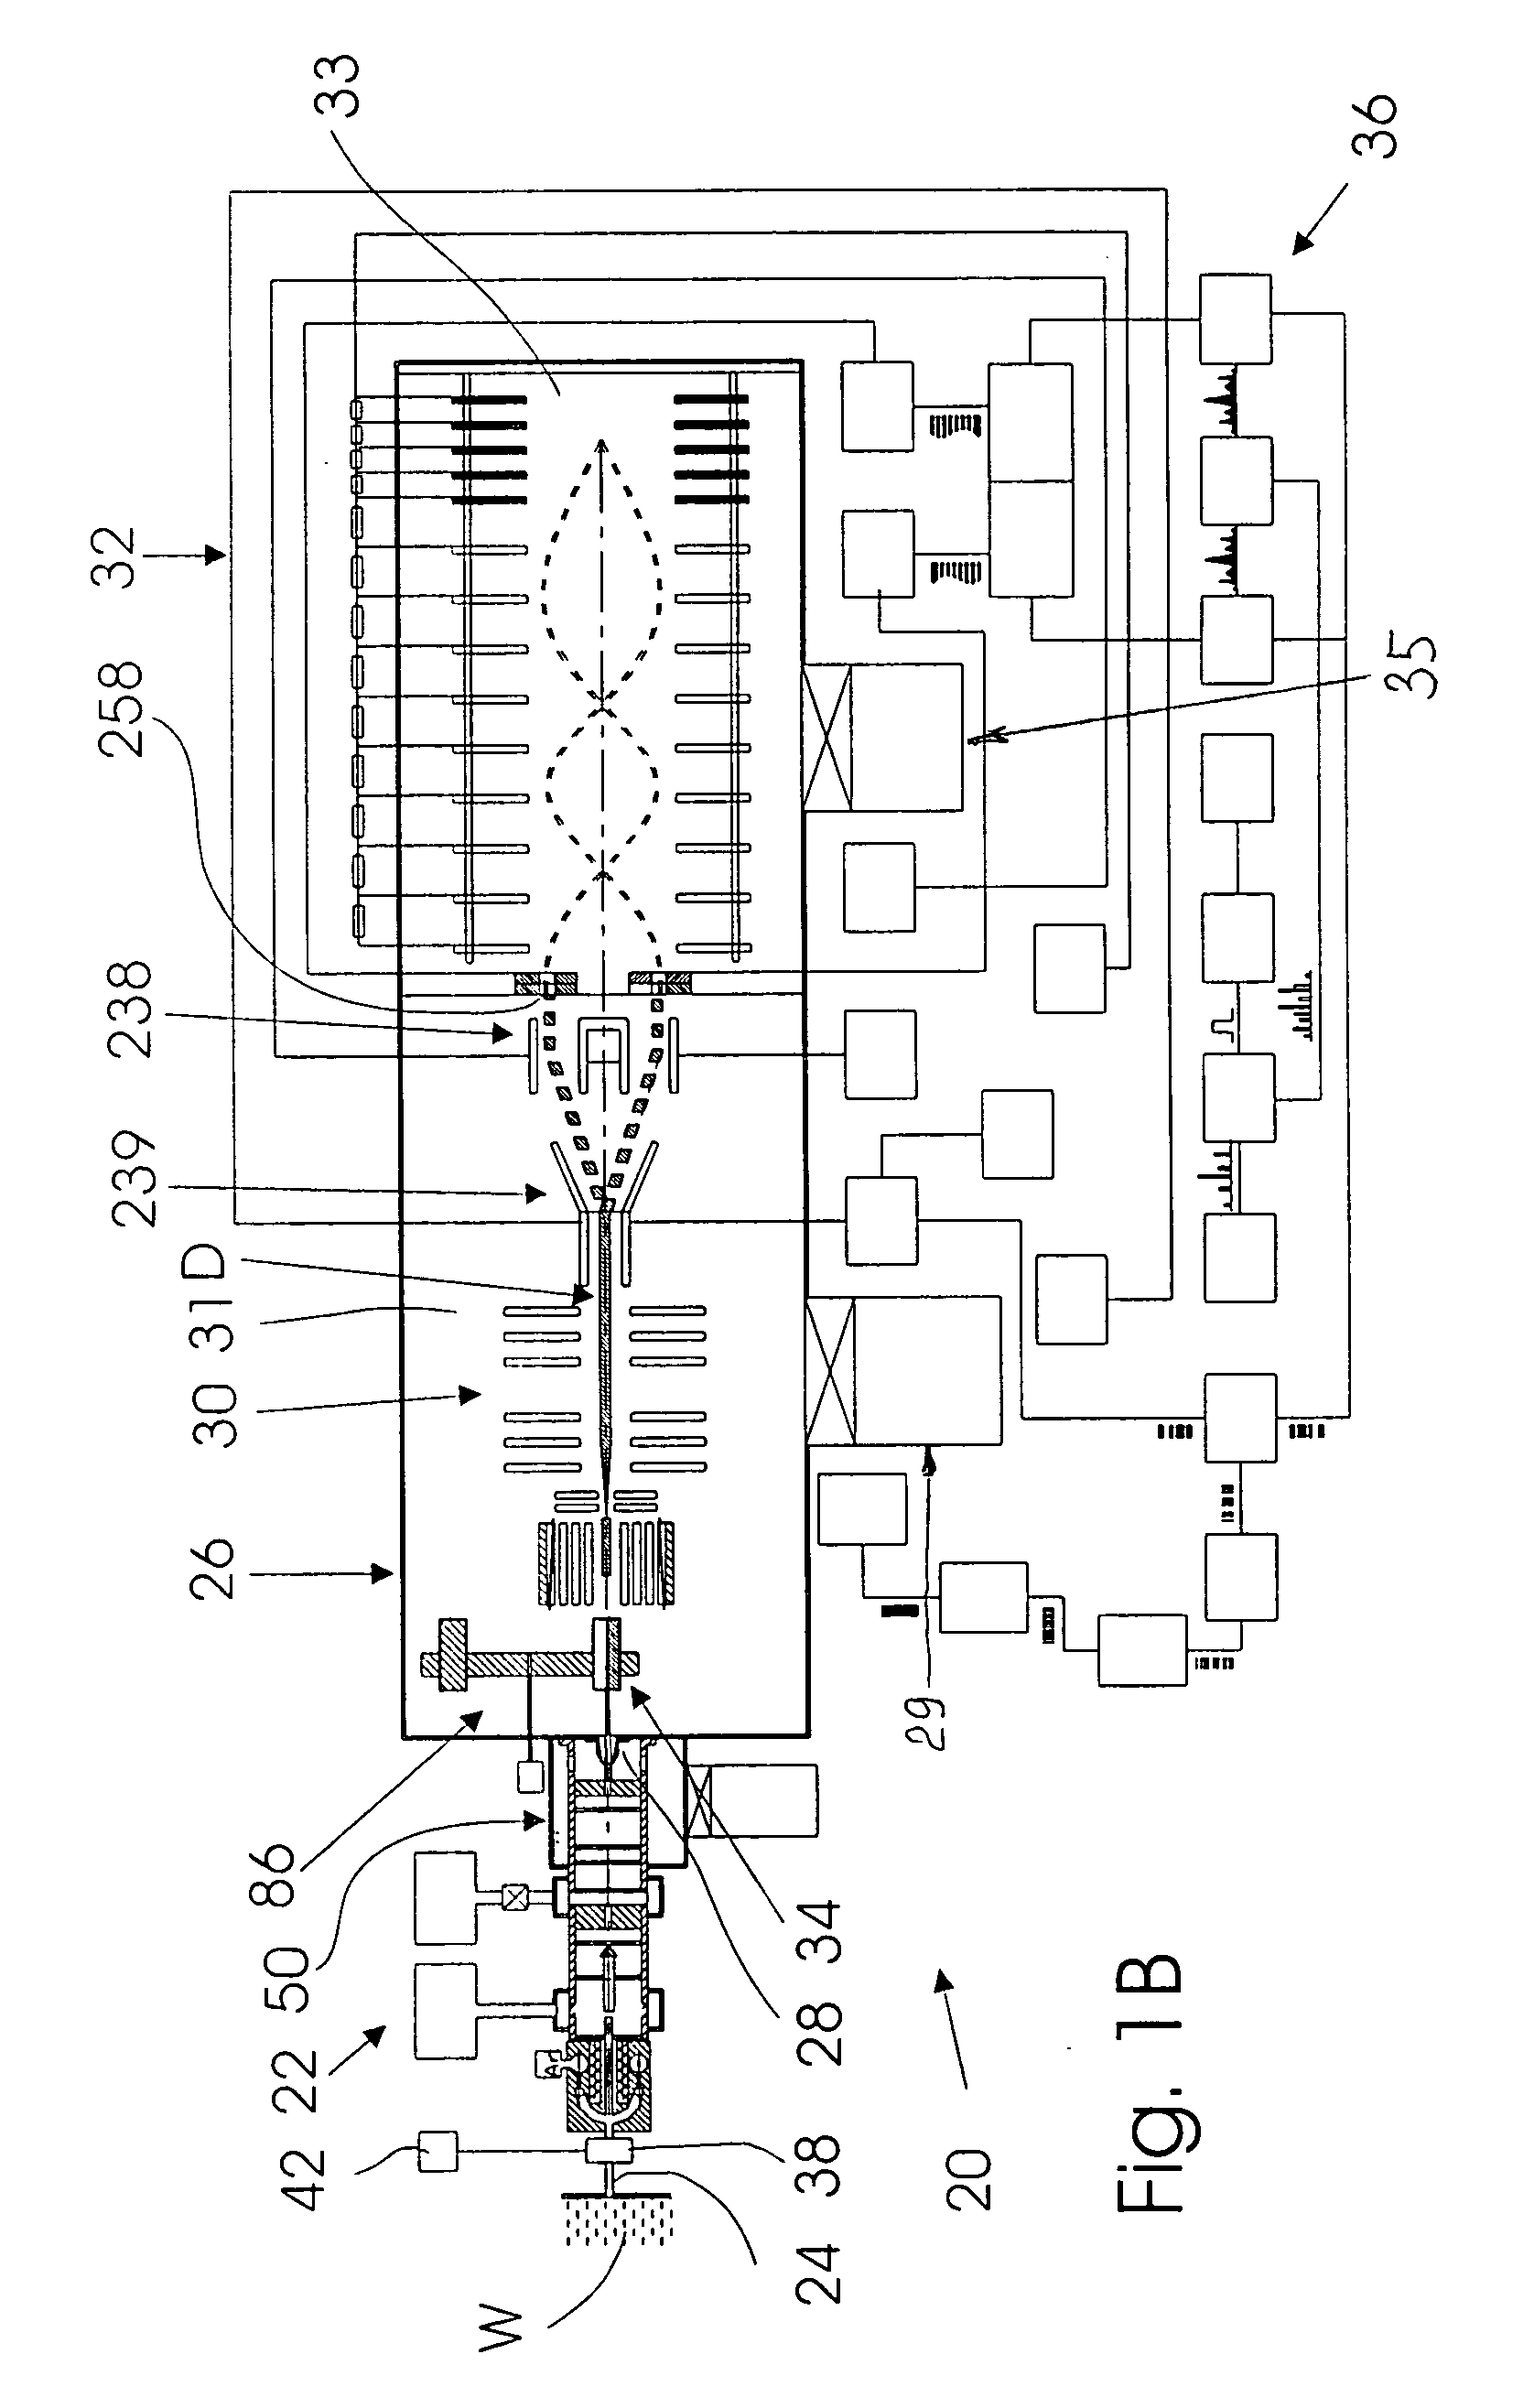 Mass spectrometry system for continuous control of environment